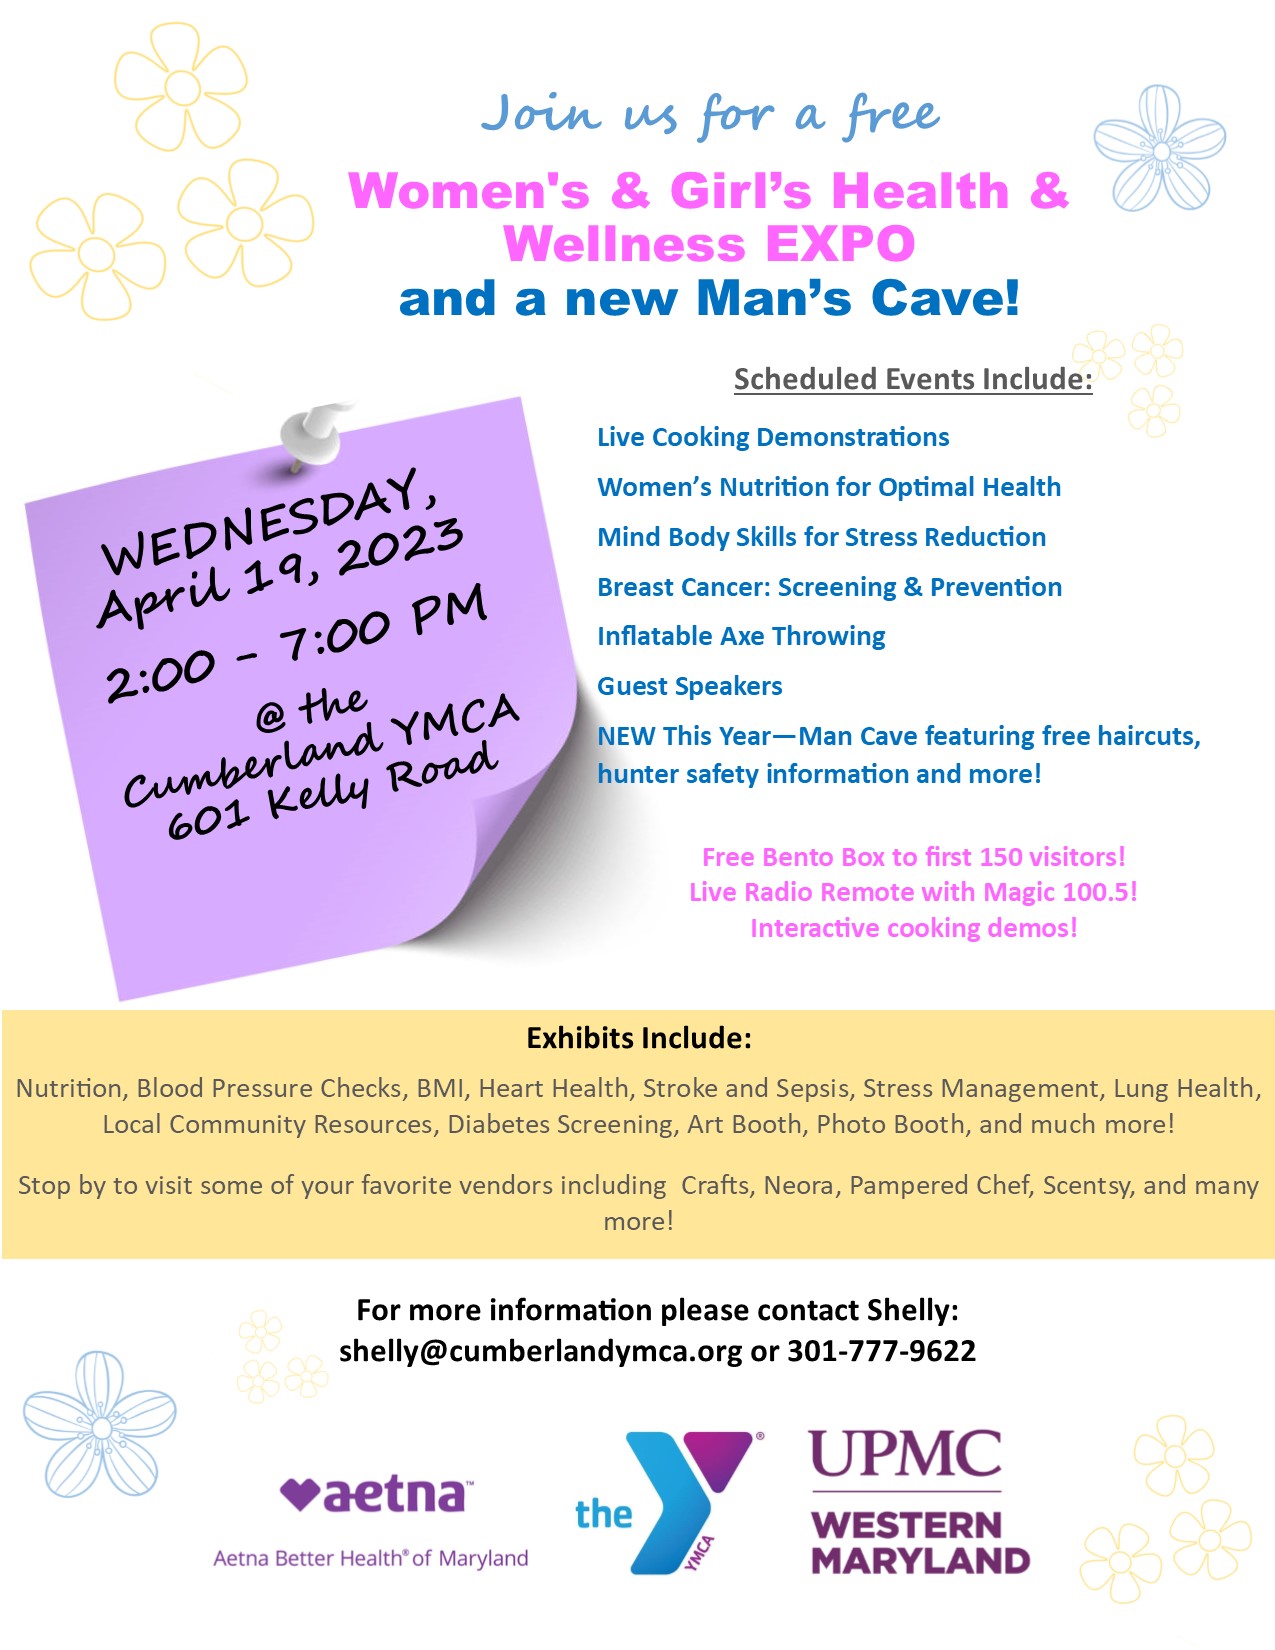 Women's Wellness Expo: Wednesday April 19 from 2-7 PM at the Cumberland (Riverside YMCA)